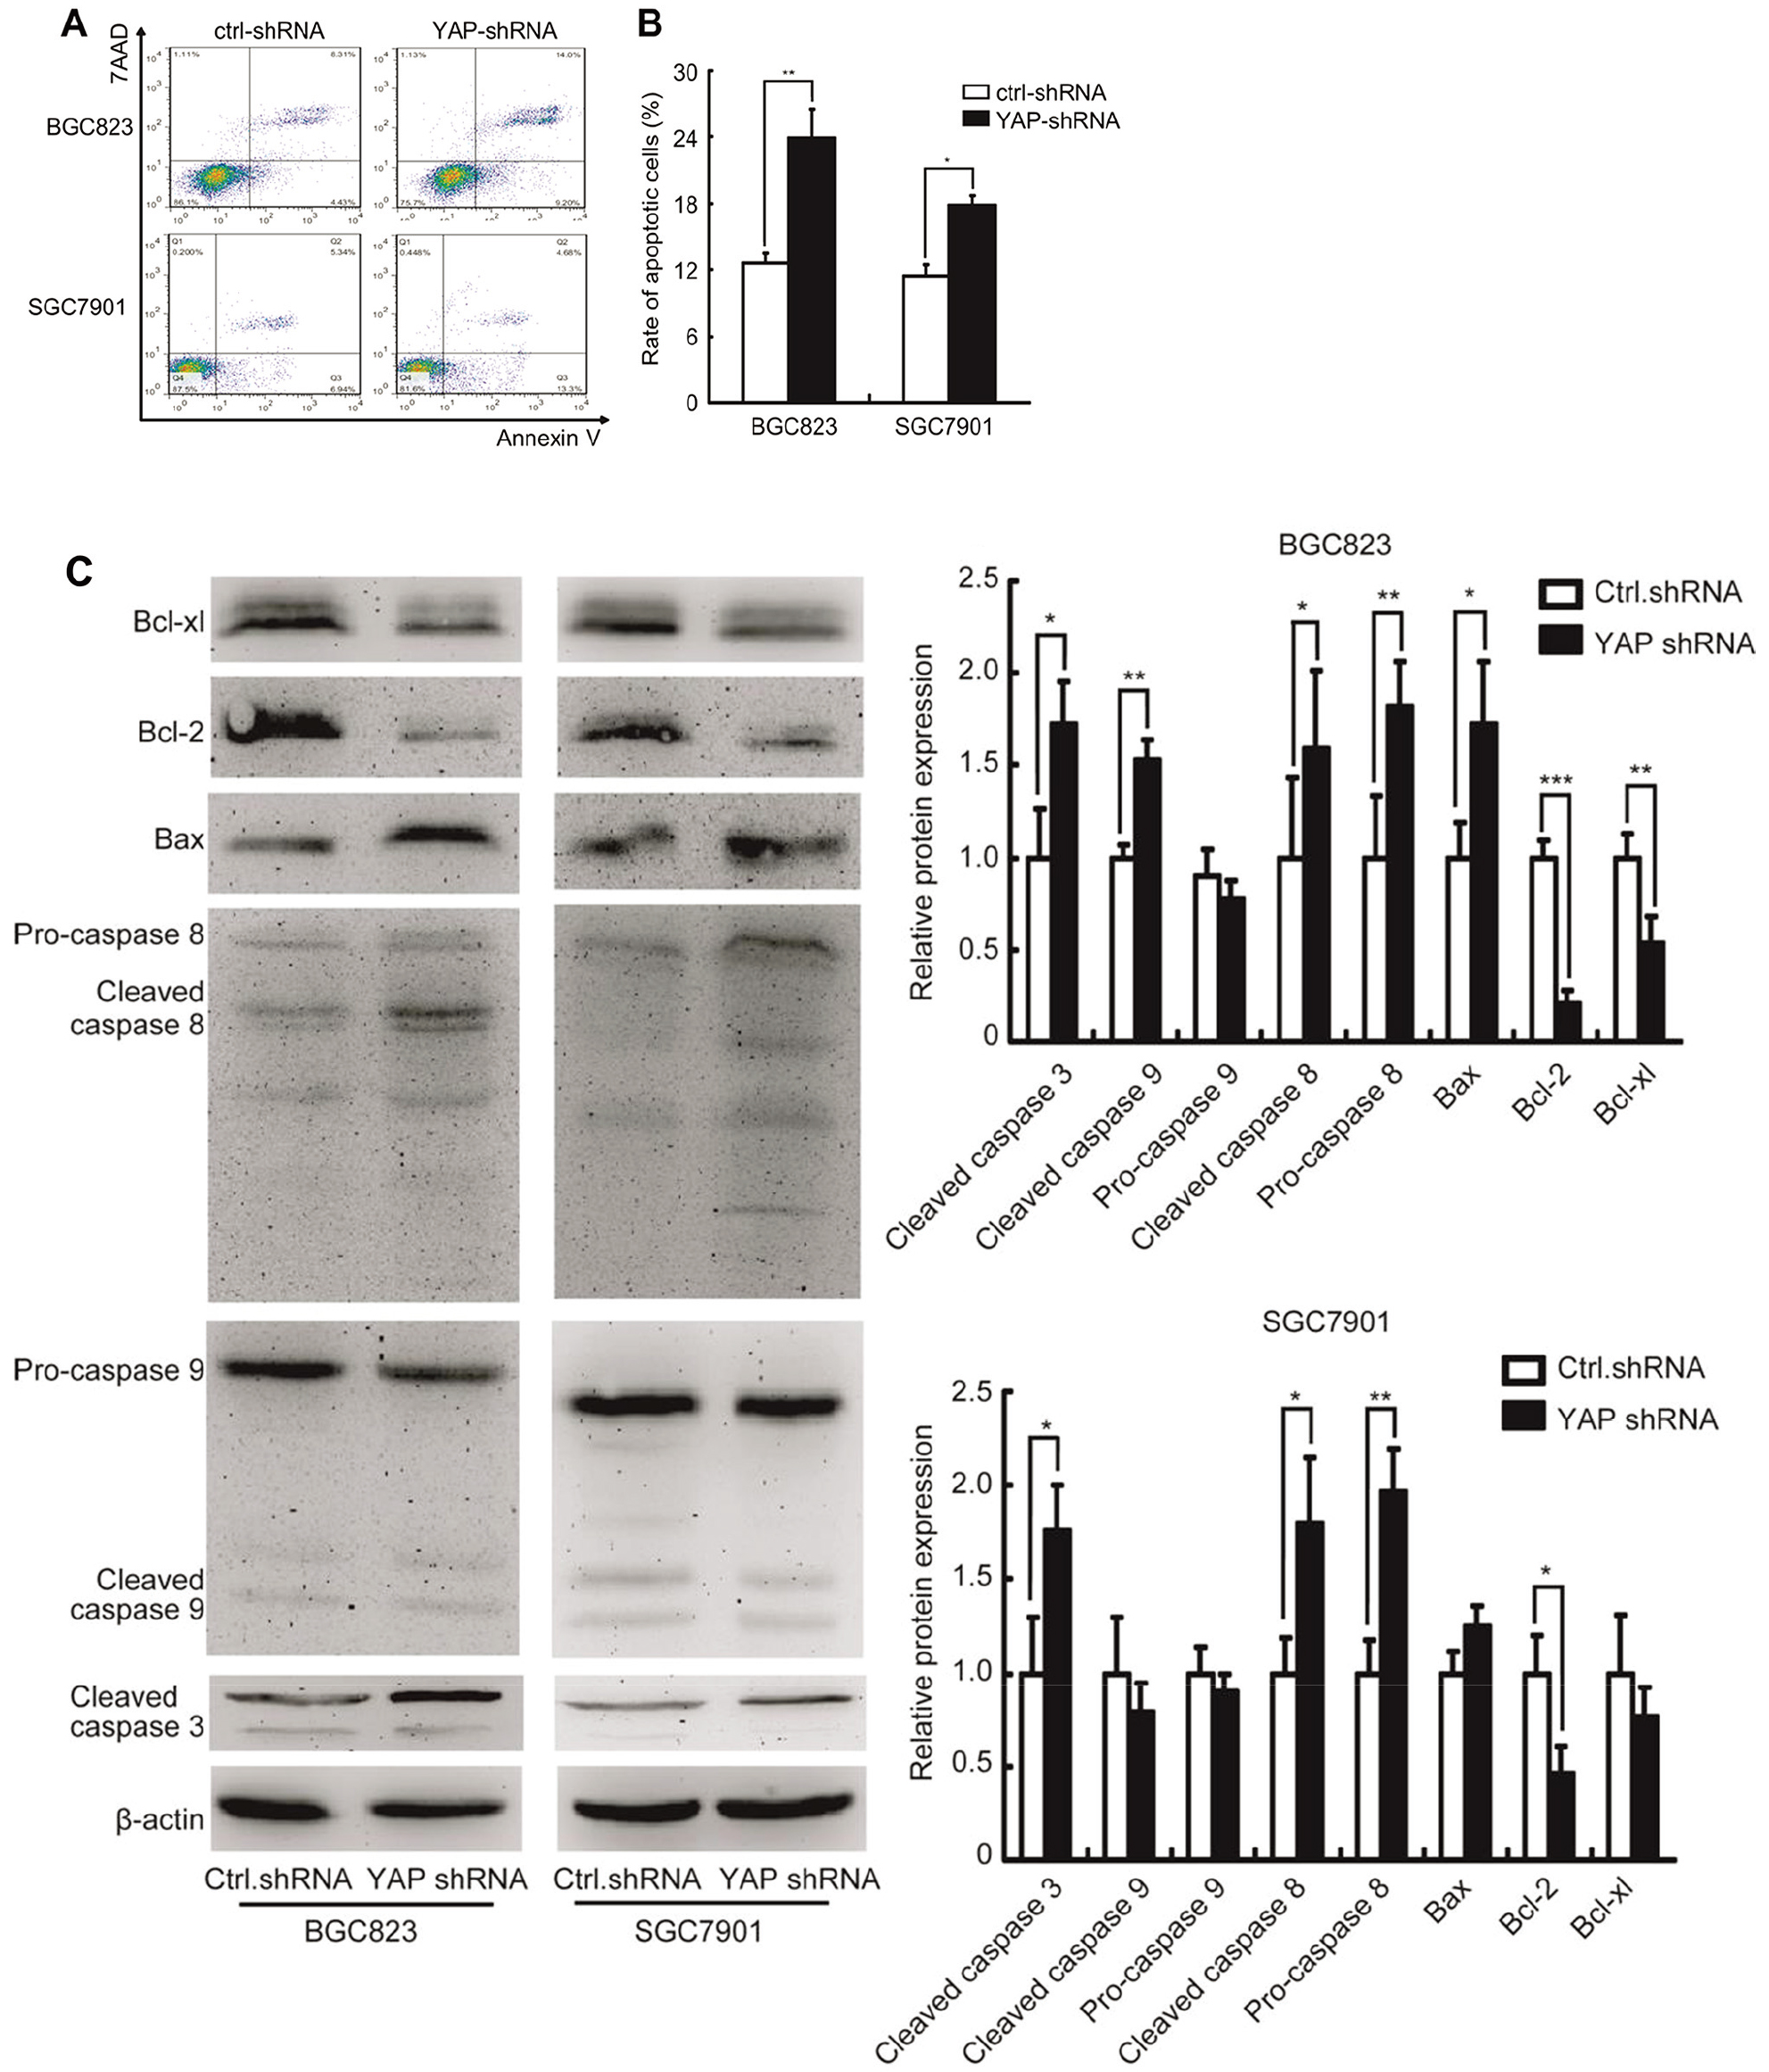 Knockdown YAP1 promotes SGC7901 and BGC823 cells apoptosis in vitro. (A) YAP-shRNA induced cell apoptosis of SGC-7901 and BGC-823 cells detected by flow cytometry. (B) Rate of apoptosis cells of SGC-7901 and BGC-823 transfected with shRNA control and YAP-shRNA. (C) Expression of Bcl-xl, Bcl-2, Bax, pro-caspase8, cleaved-caspase8, pro-caspase9, cleaved-caspase9, cleaved-caspase3 detected by Western blot. P*< 0.05, P**< 0.01, P*⁣**< 0.001.